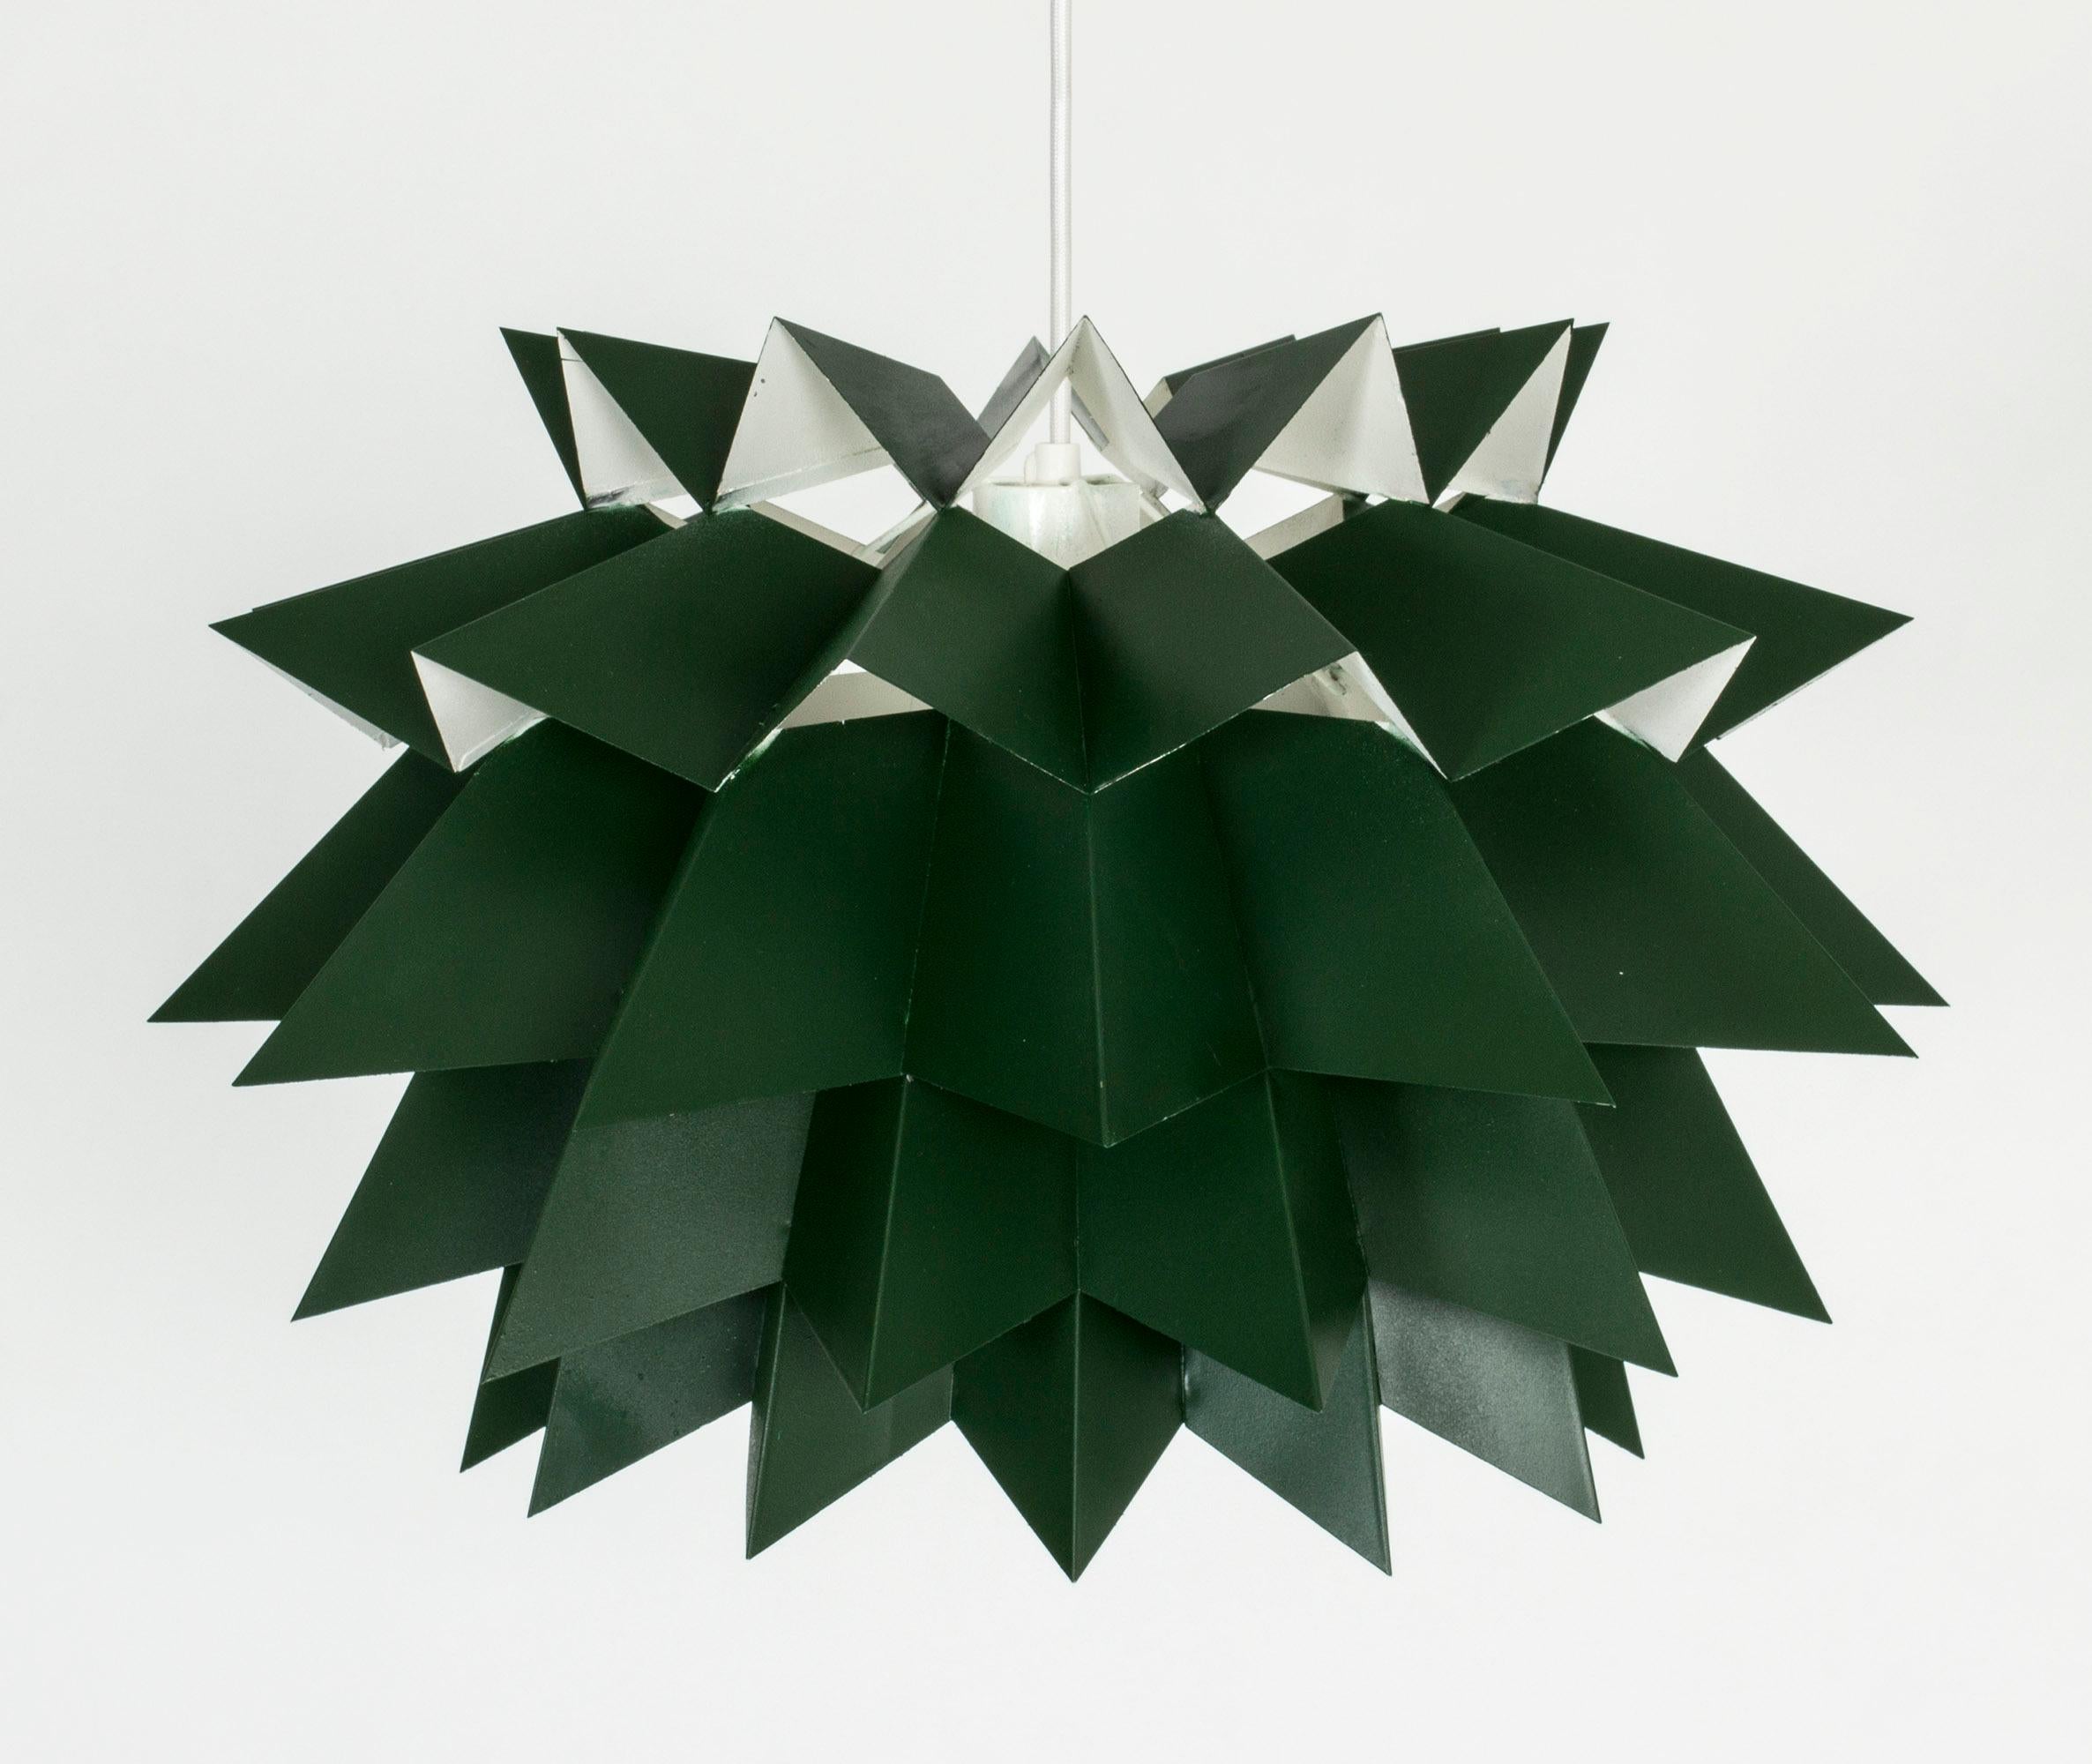 Striking “Starlight” pendant lamp, also referred to as “Sydney light”, by Anton Fogh Holm and Alfred J. Andersen. Lacquered dark green on the outside, white on the inside.